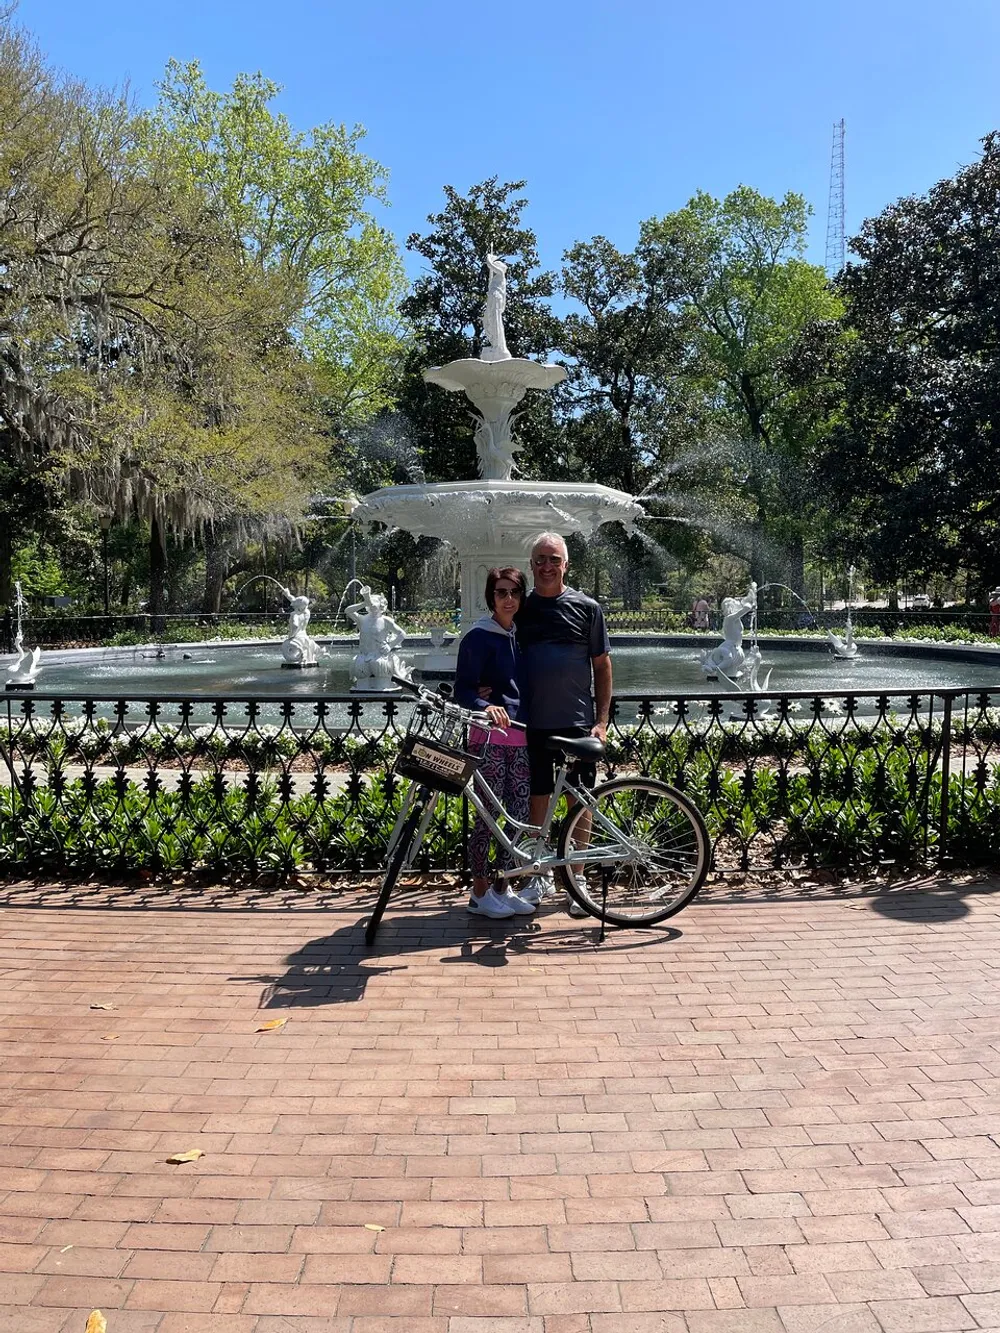 Two people are standing in front of a decorative fountain with a bicycle smiling for a photo on a sunny day